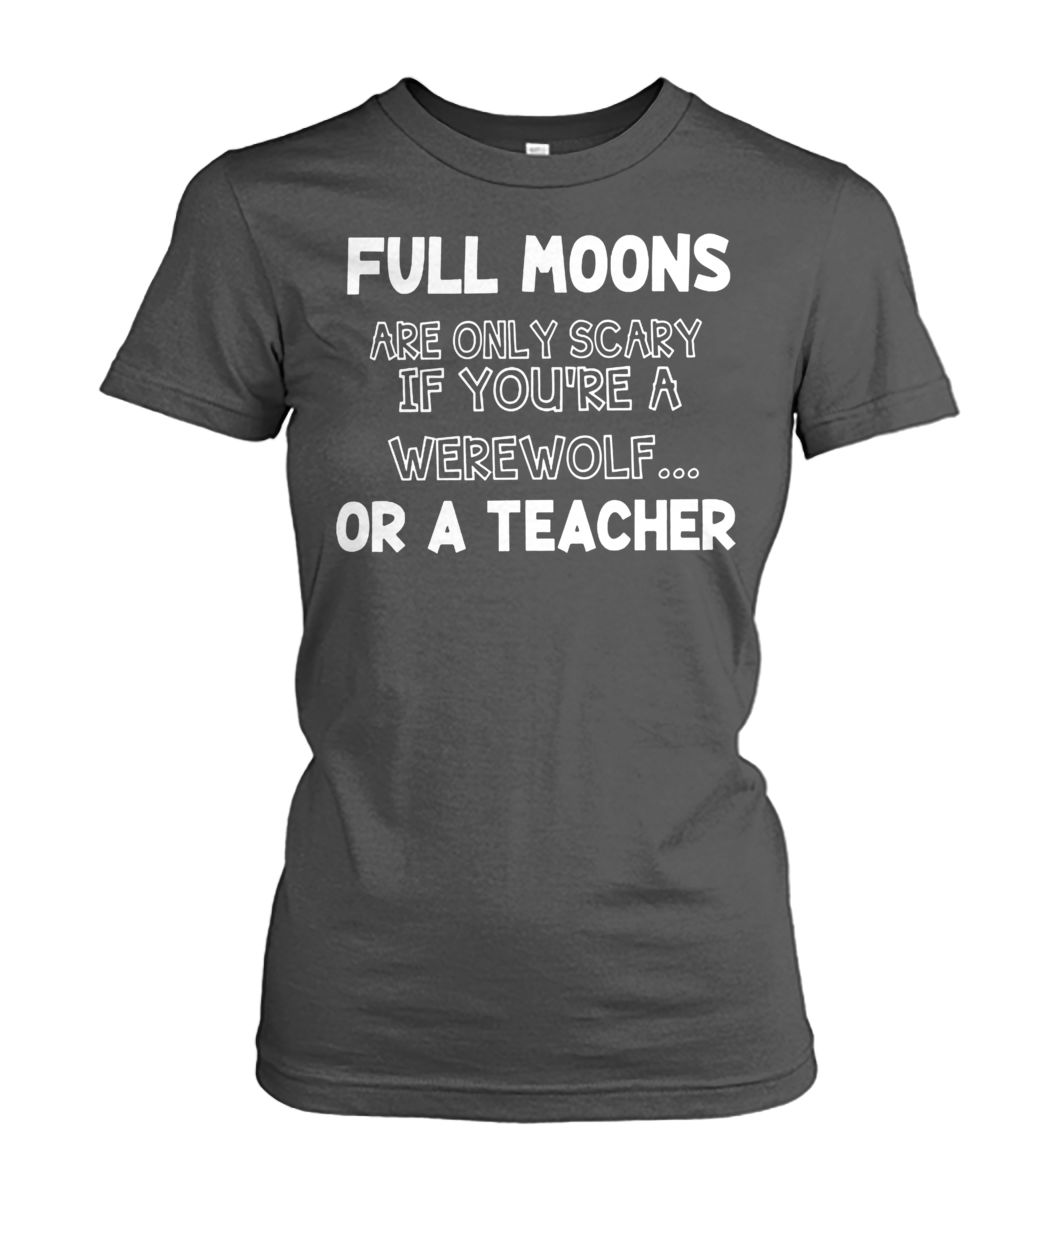 Full moons are only scary if you're a werewolf or a teacher women's crew tee